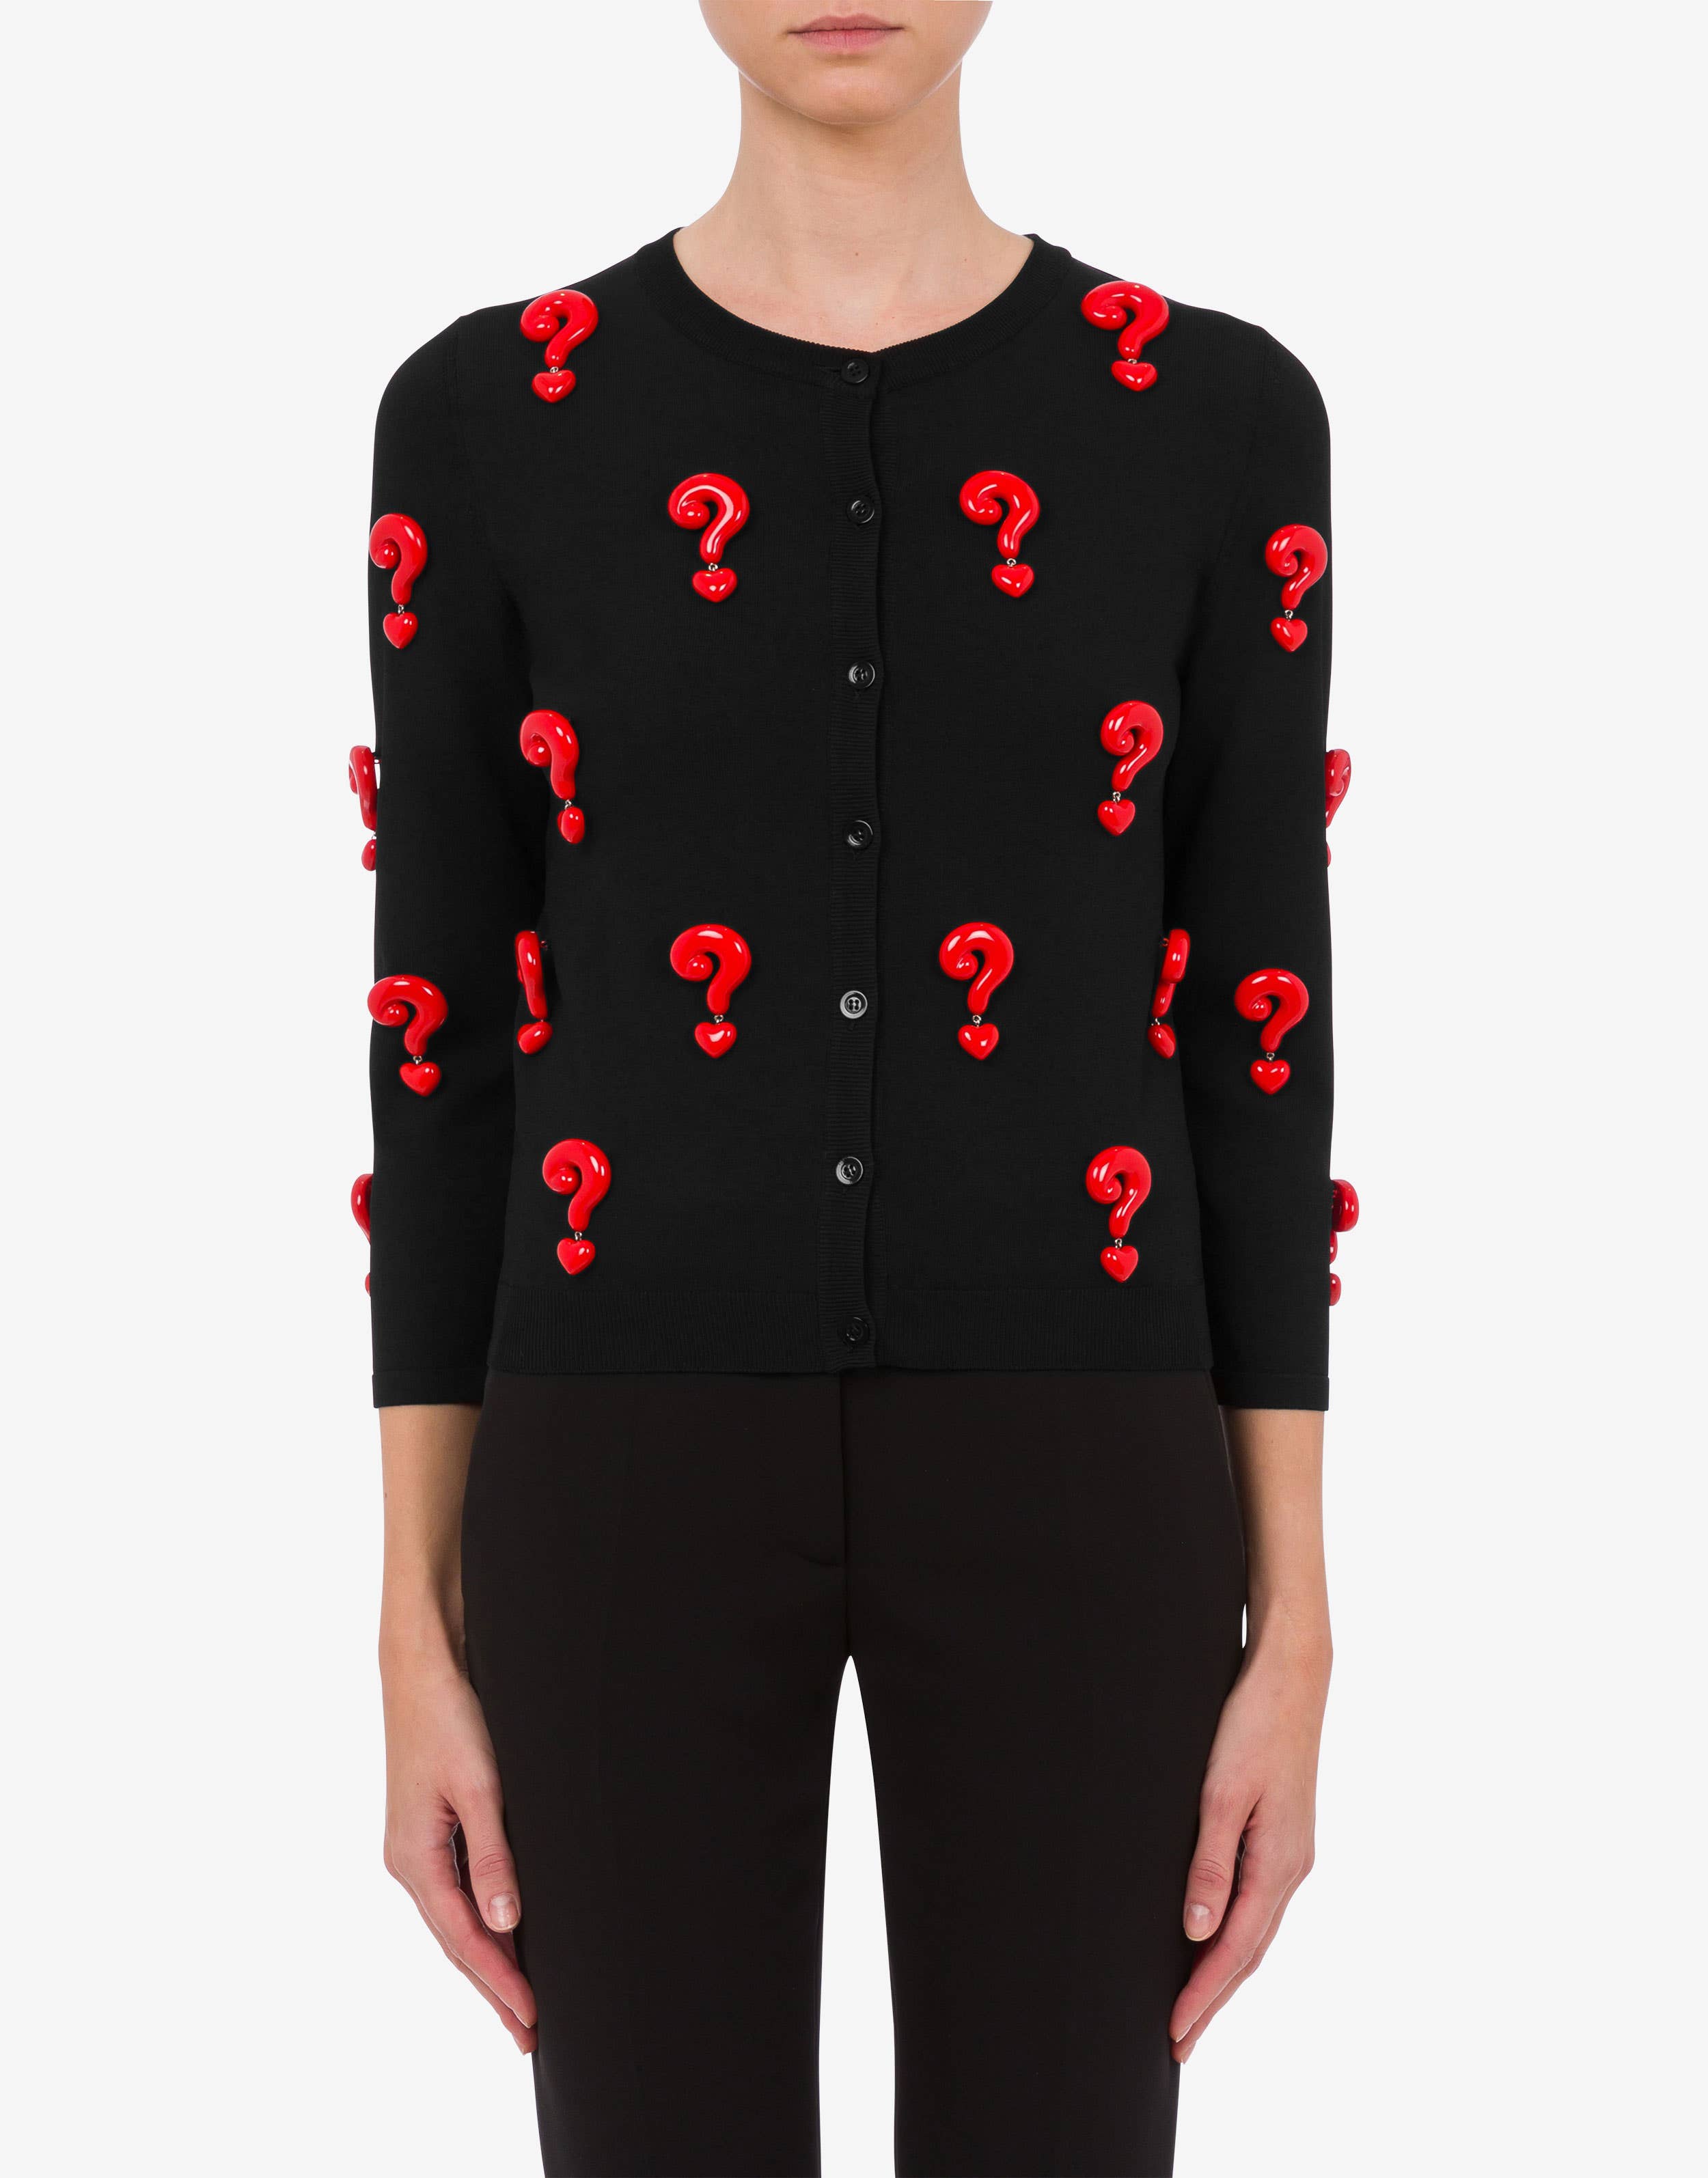 Red Question Marks stretch cardigan